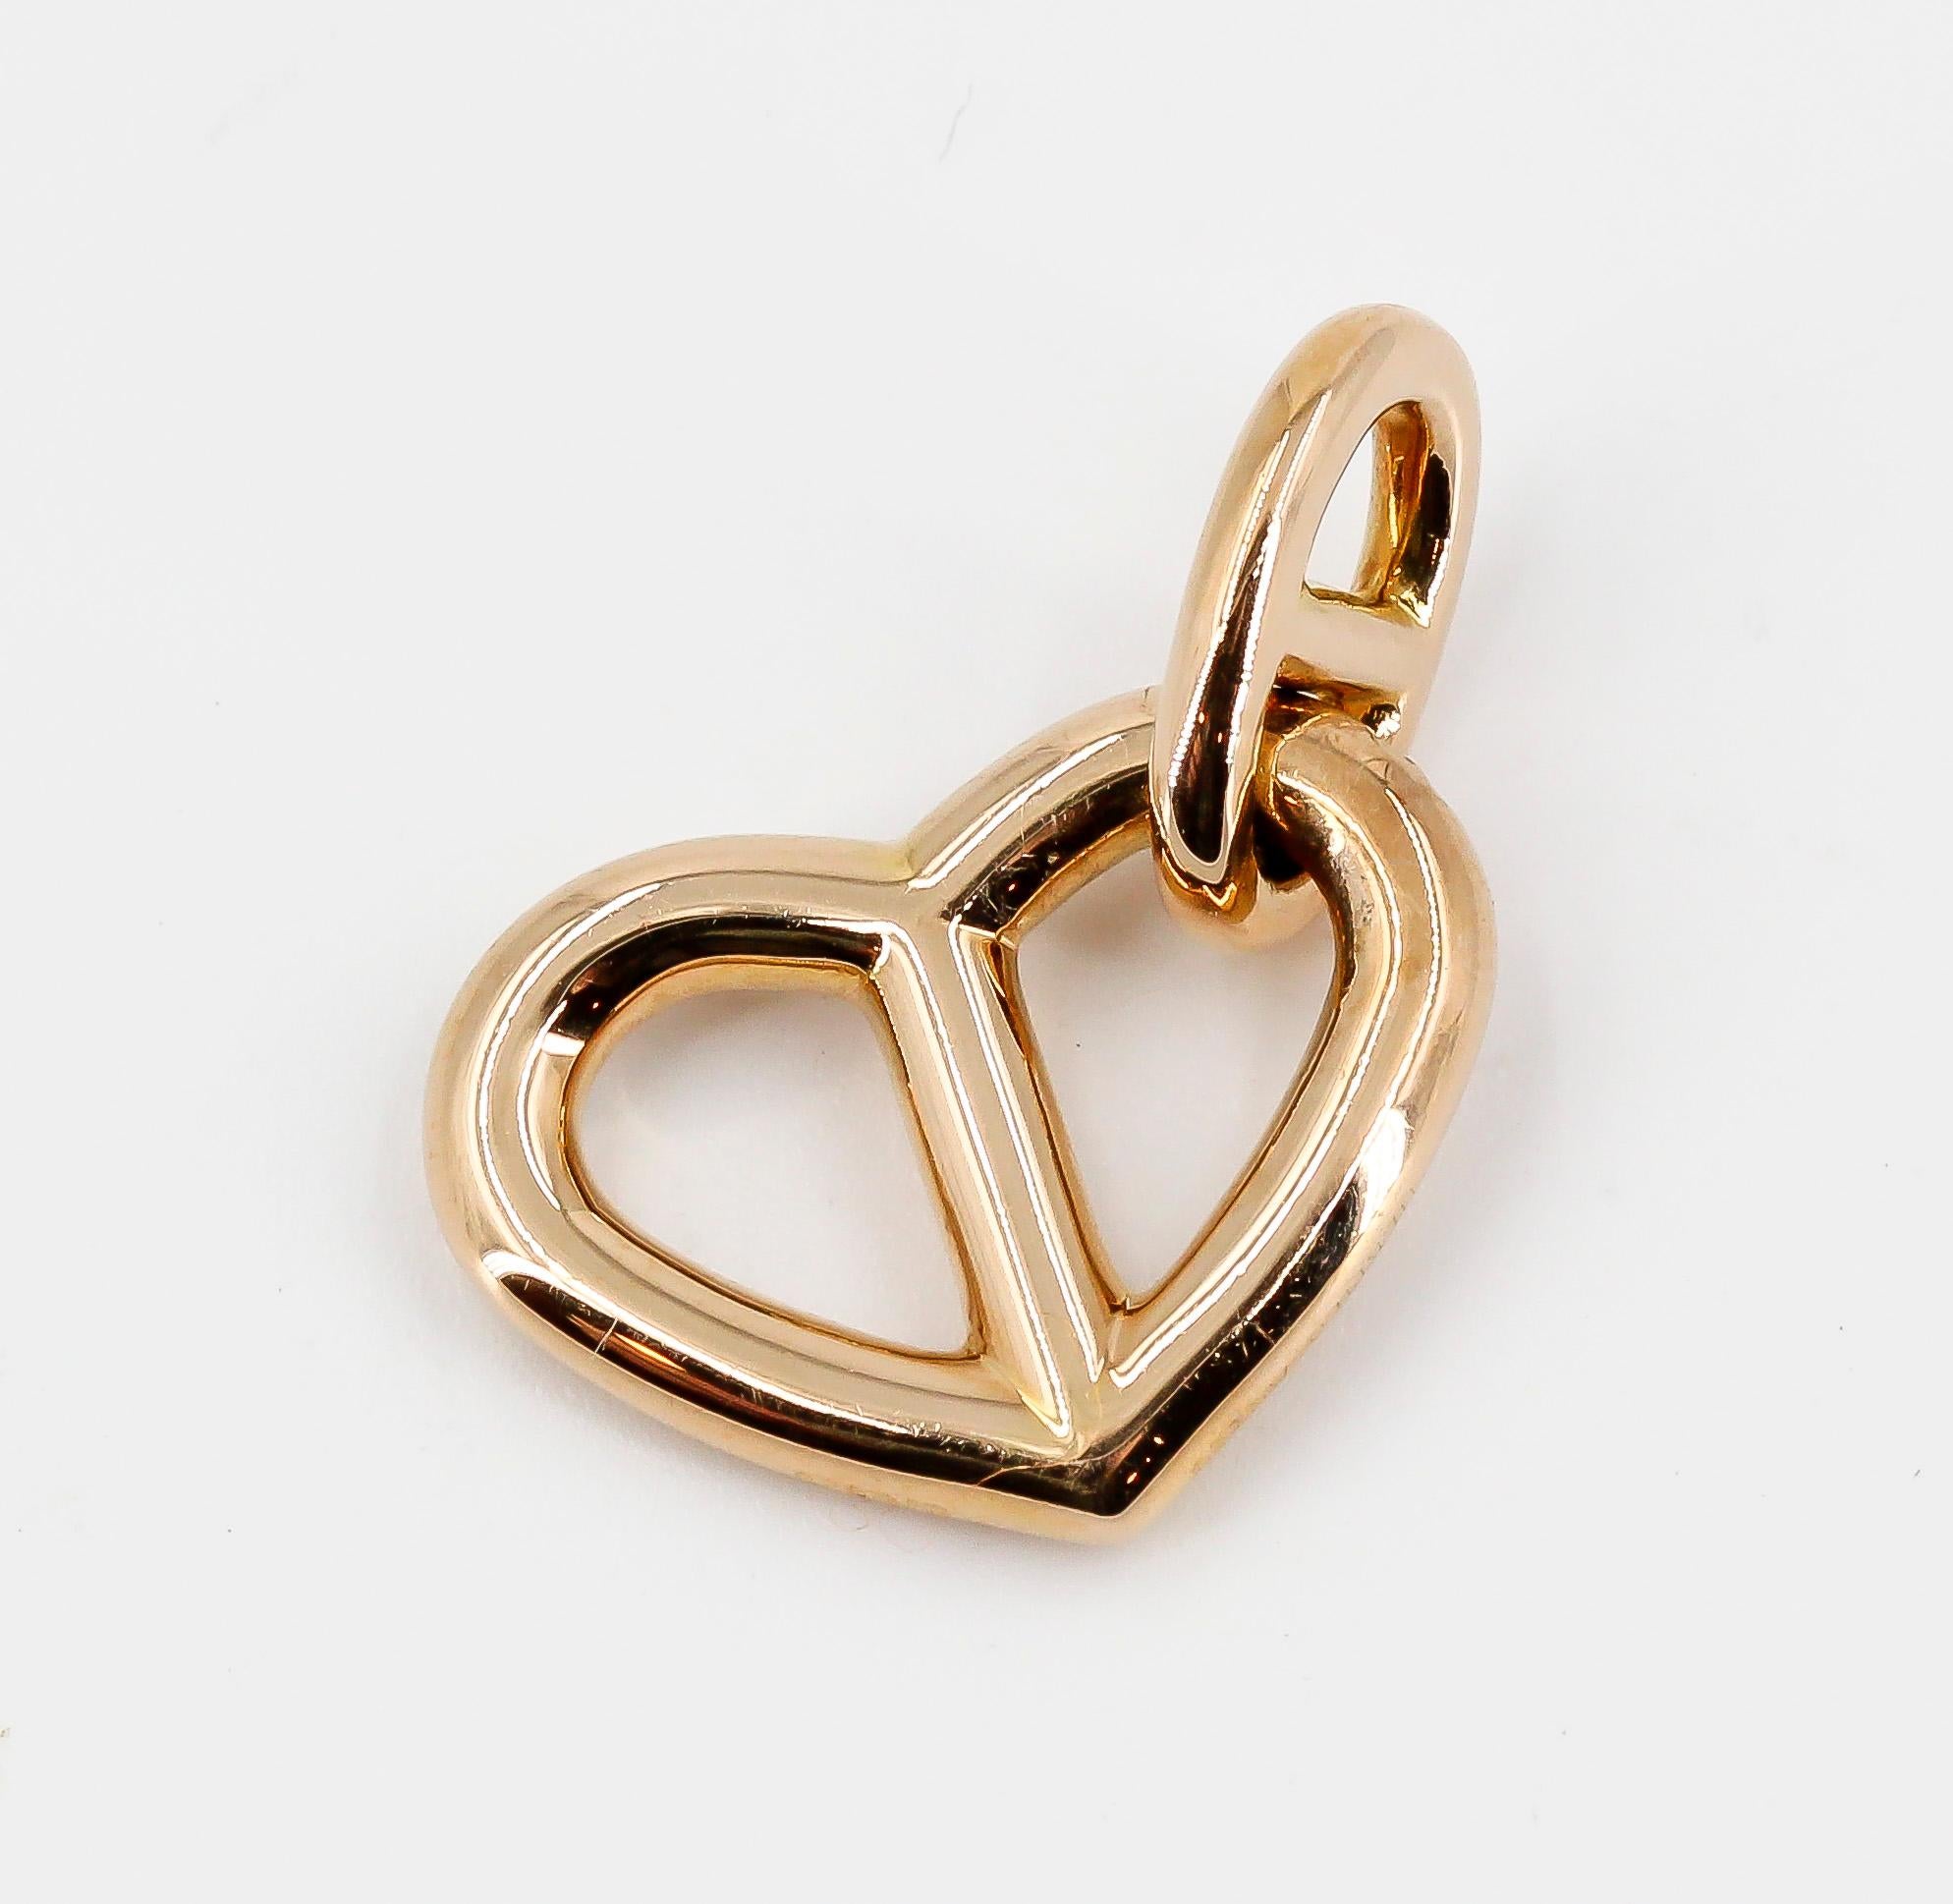 Elegant diamond and 18K rose gold heart shaped charm or pendant by Hermes. Features a single high grade round brilliant cut diamond, approx. 0.05cts total weight.

Hallmarks: Hermes, reference numbers, French 18K gold assay mark, AU 750, maker's